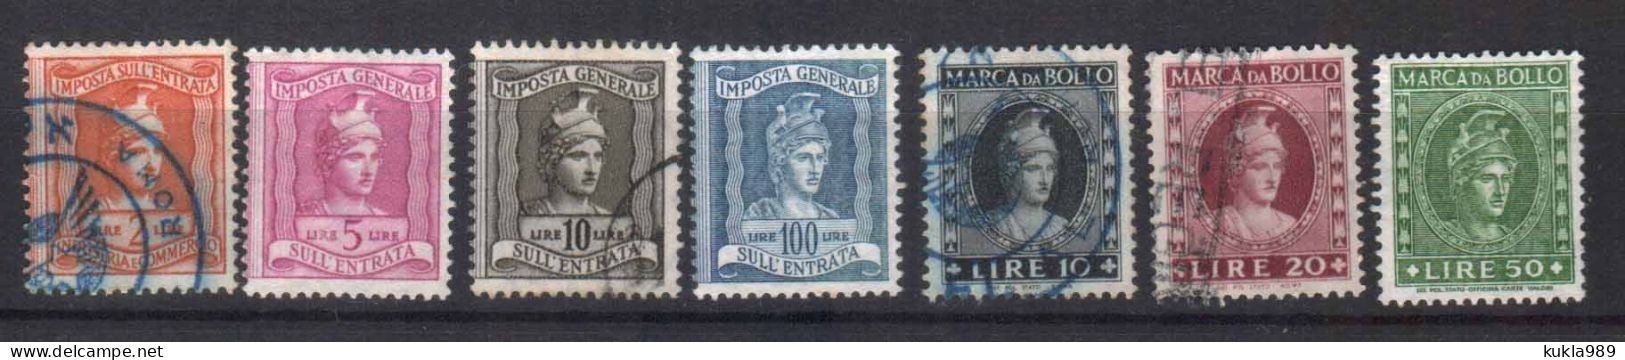 ITALY , C.1950s FISCAL REVENUE TAX 7 STAMPS - Fiscali